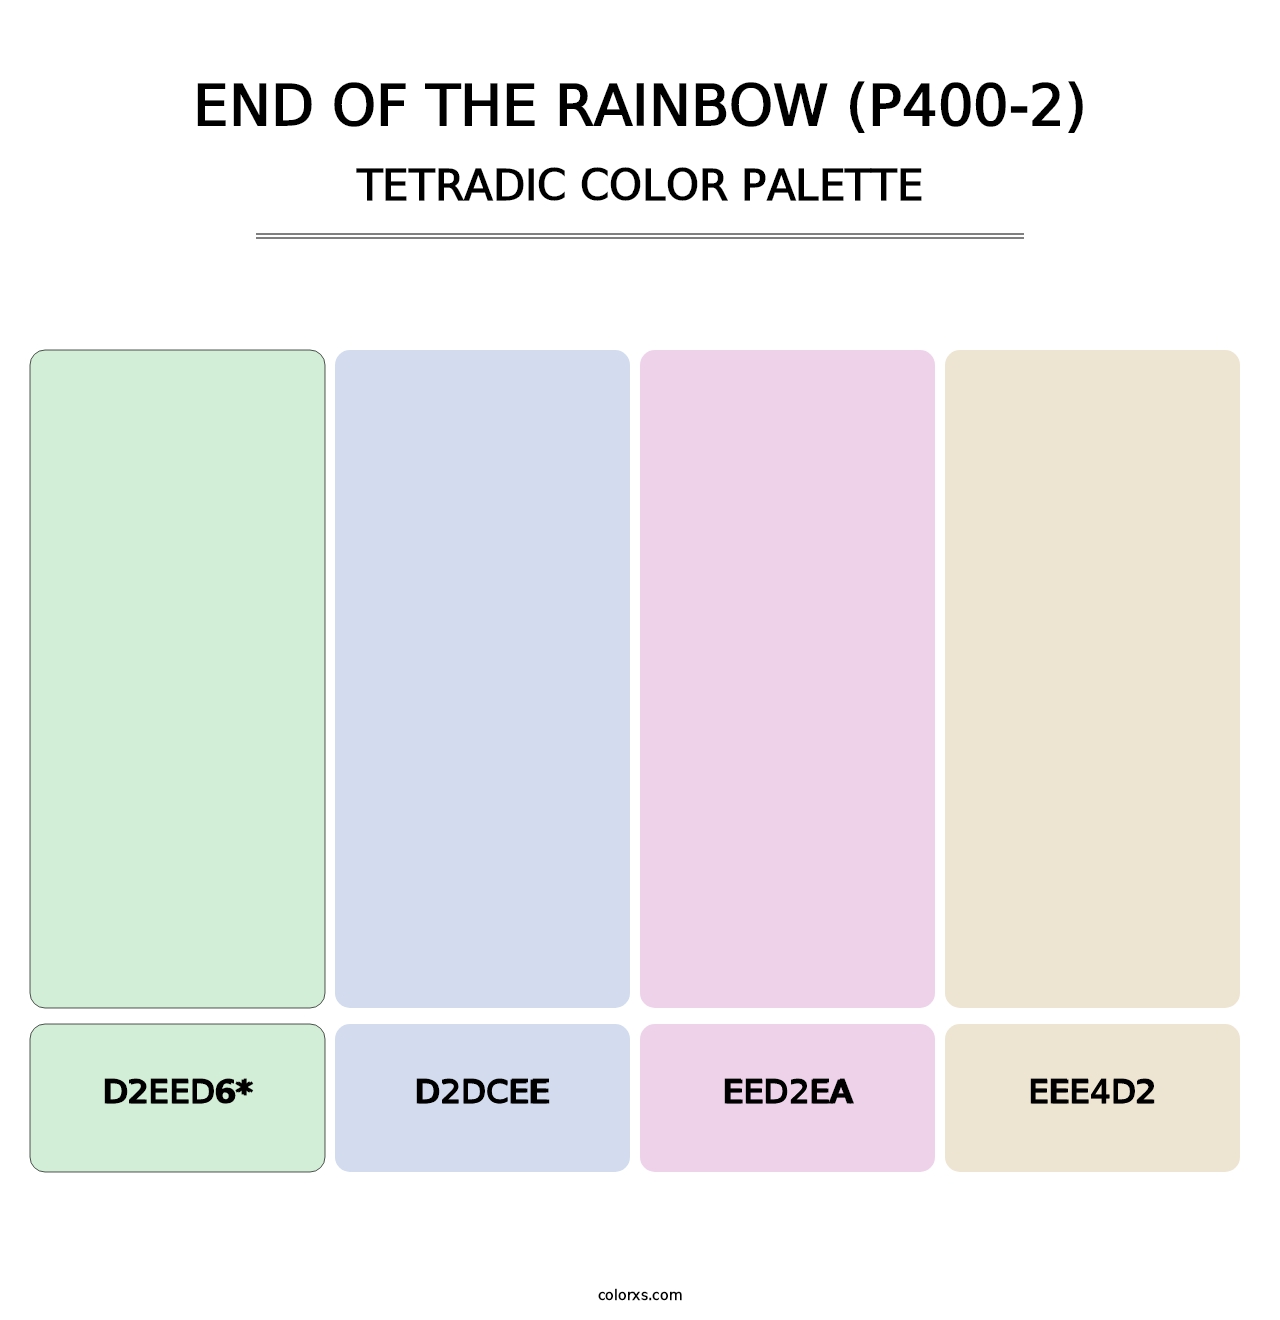 End Of The Rainbow (P400-2) - Tetradic Color Palette